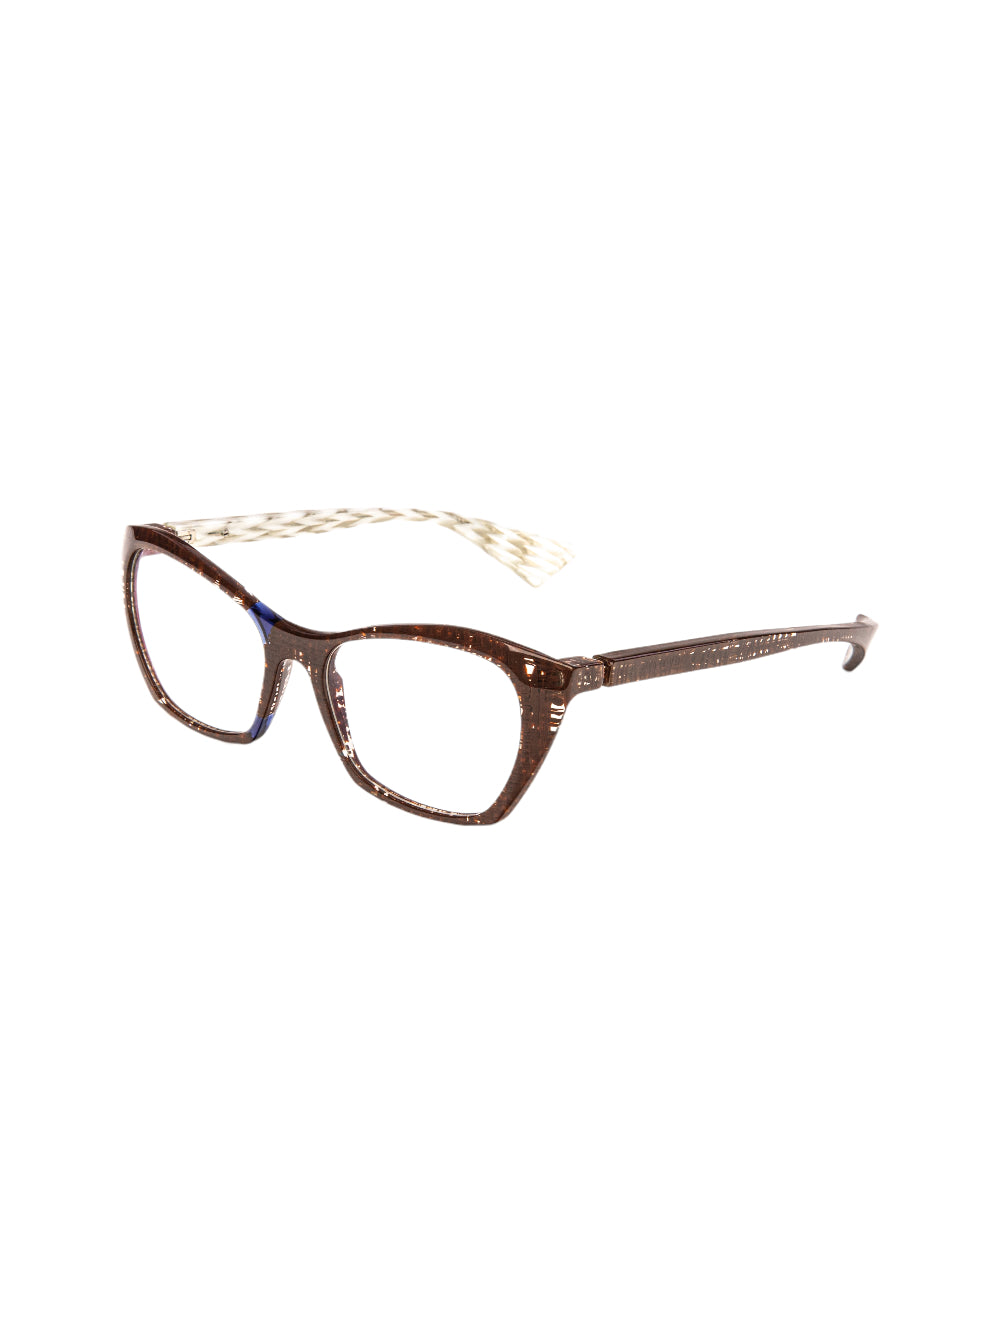 PM496 - KNURLED BROWN